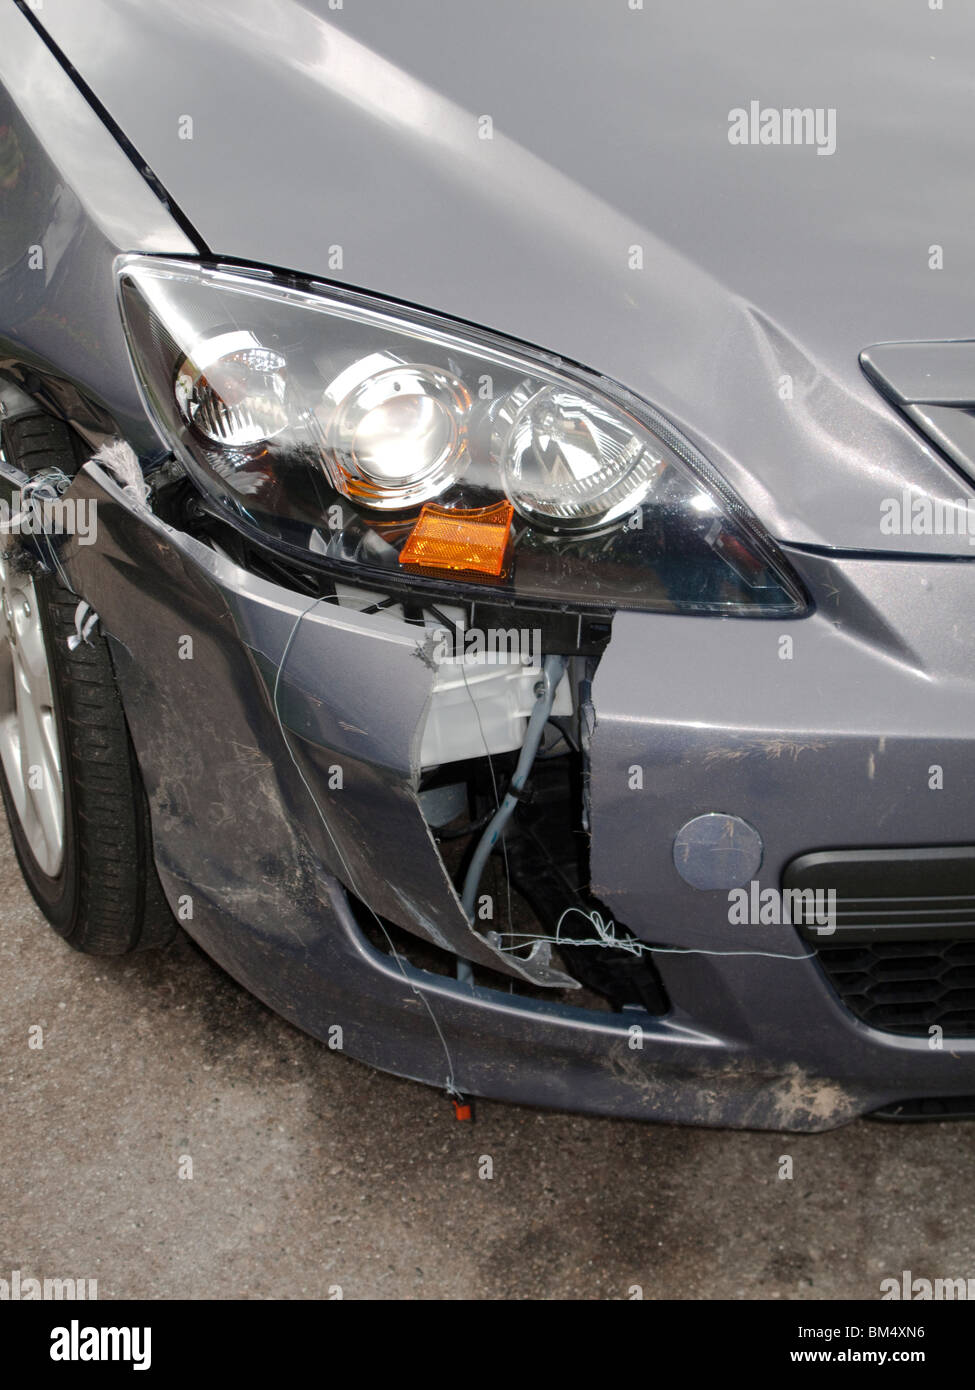 Broken in a crash, a car's brittle plastic bumper cover shows the vehicle's vulnerability to collision damage. Stock Photo